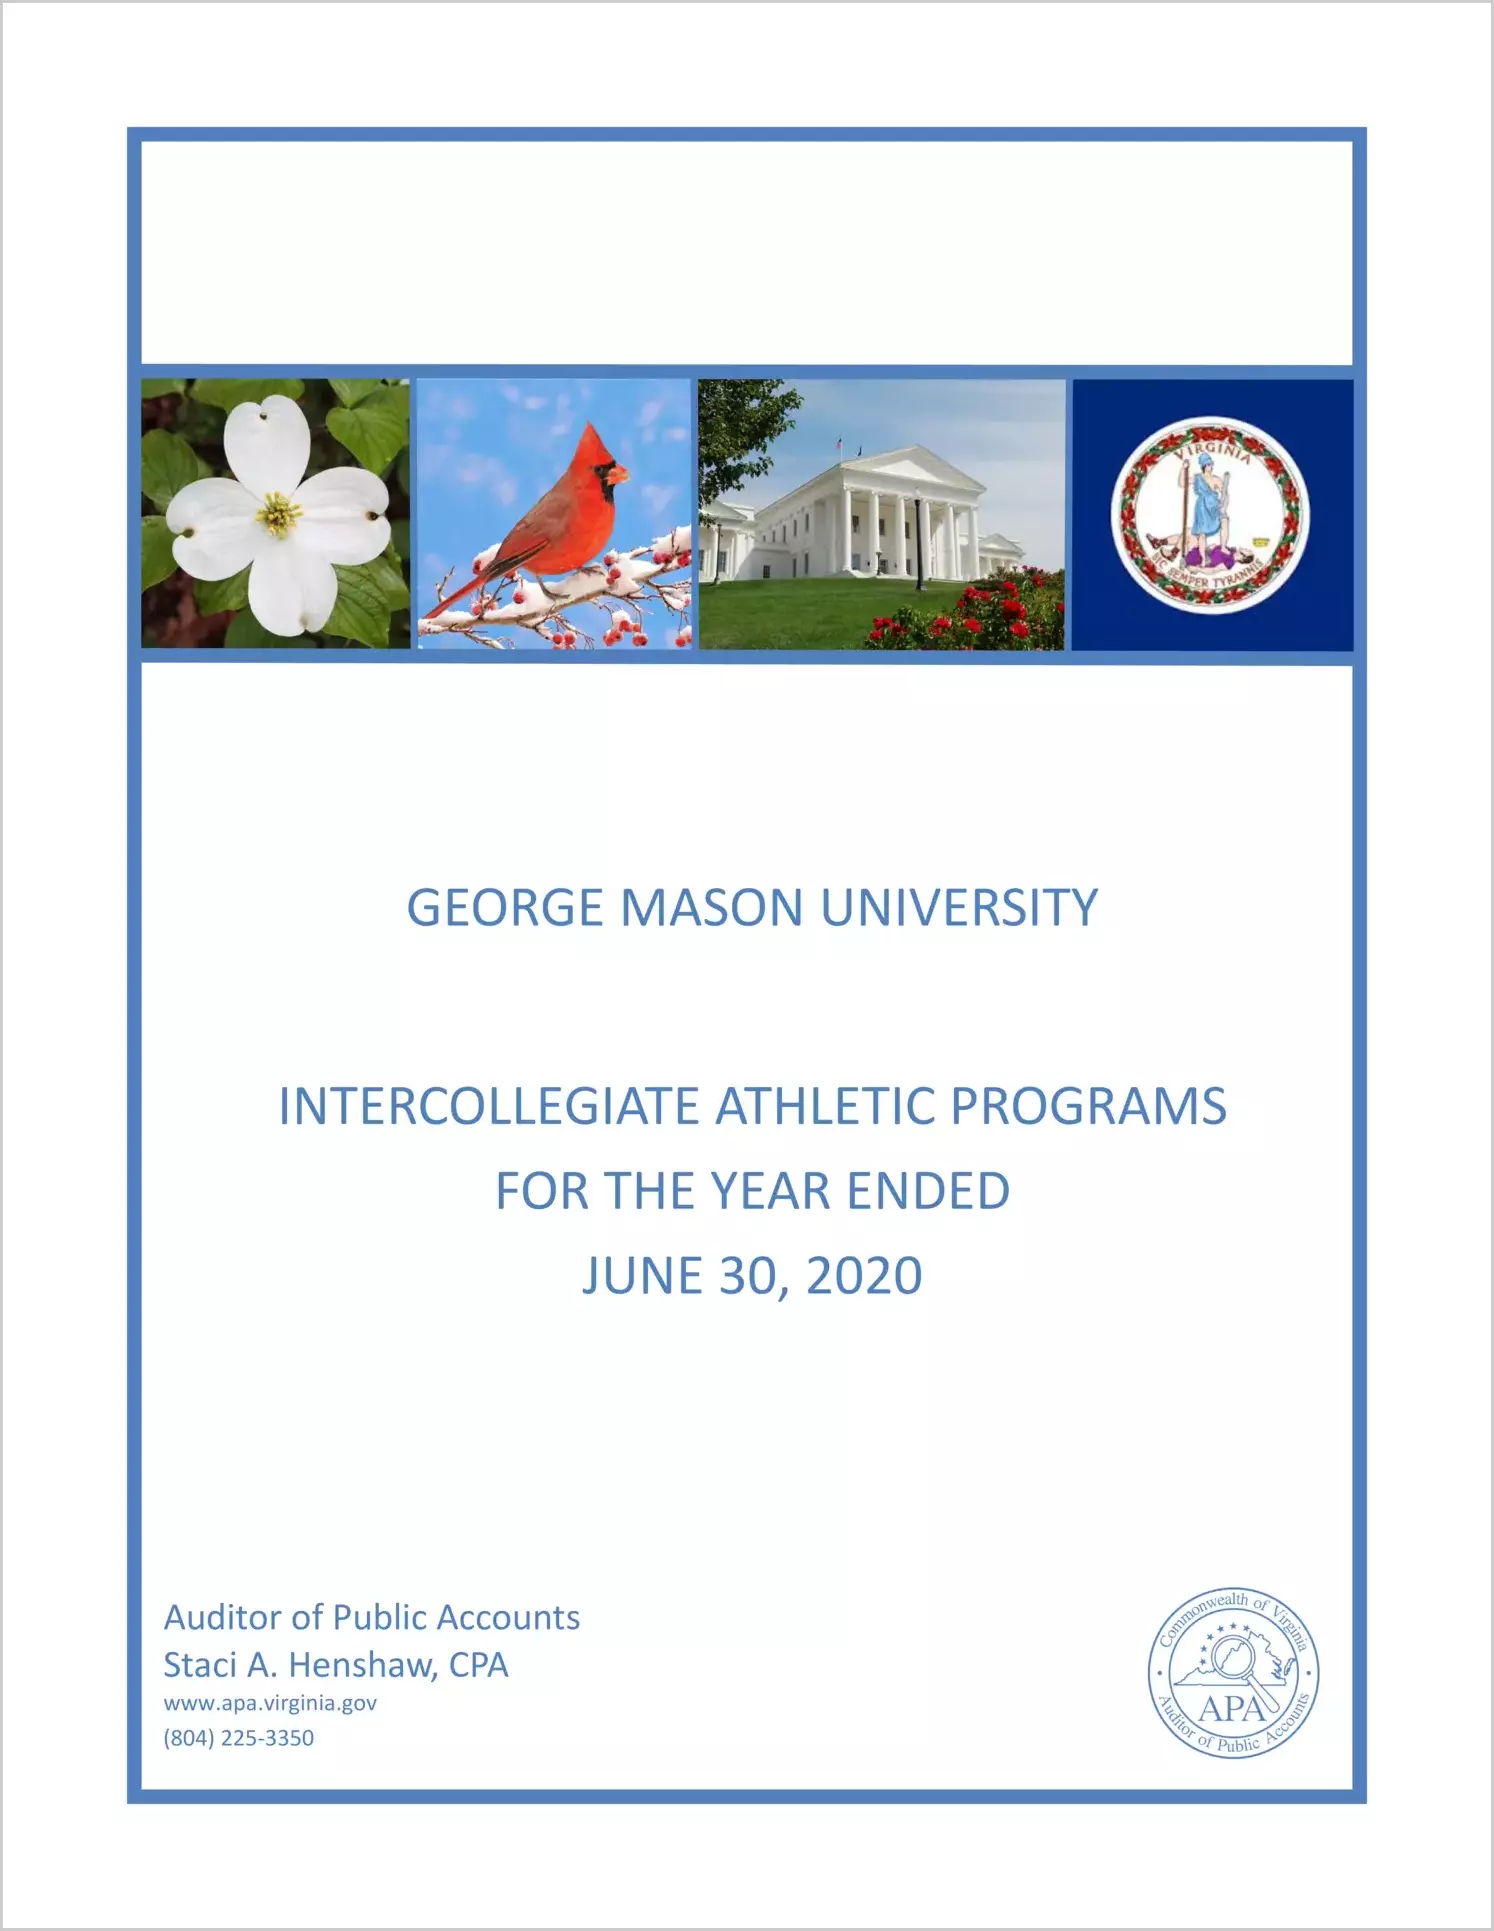 George Mason University Intercollegiate Athletic Programs for the year ended June 30, 2020